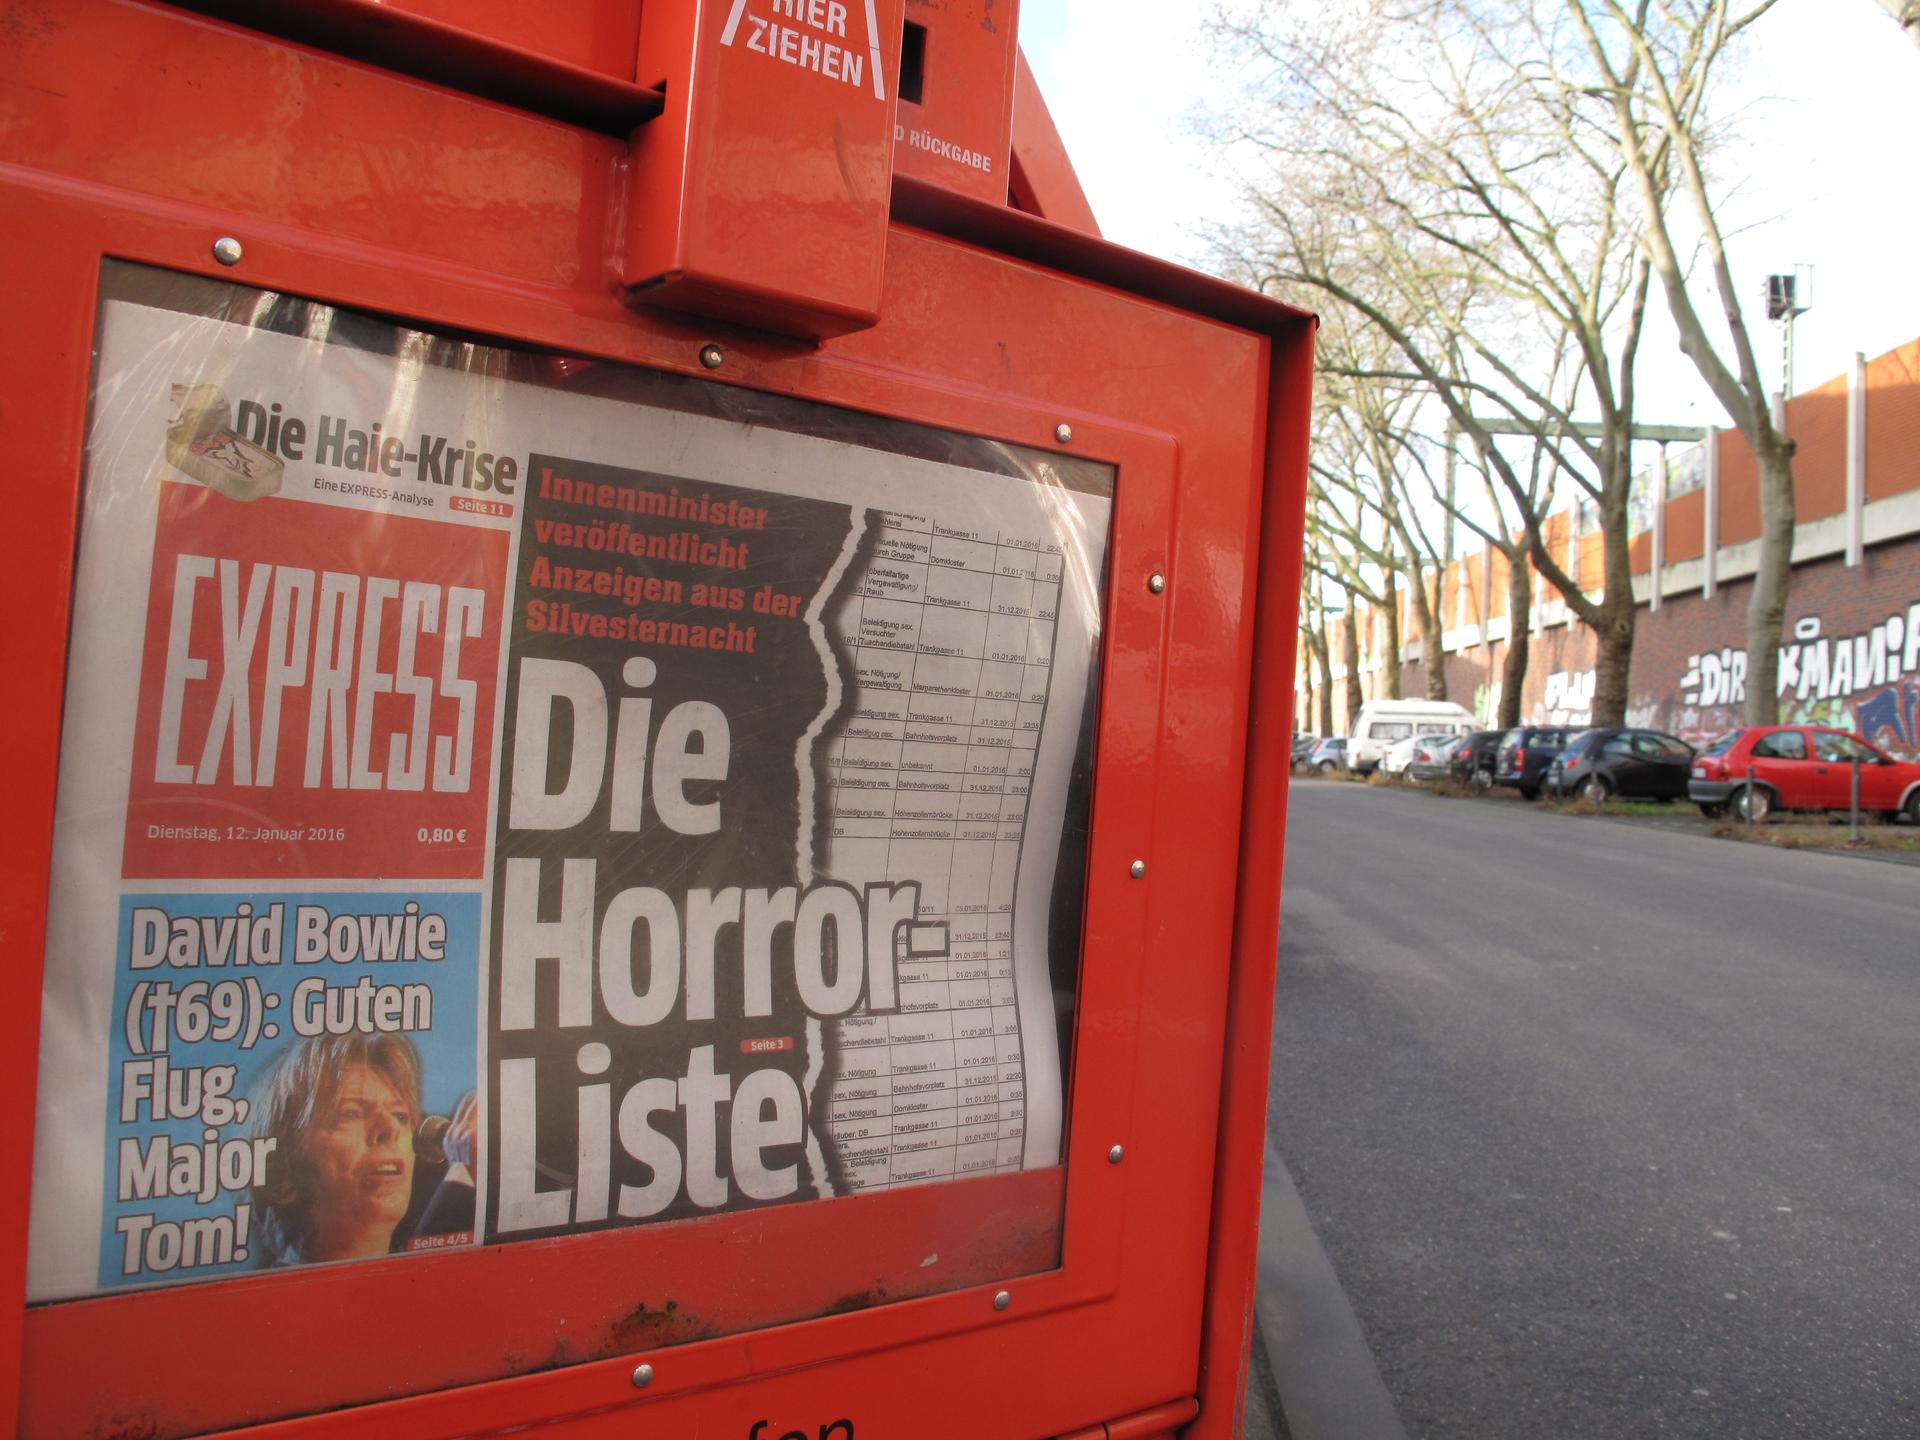 The German press has been filled with pages of sensational accounts of young women suffering at the hands of criminal migrants. On Tuesday, Cologne's Express newspaper led with 